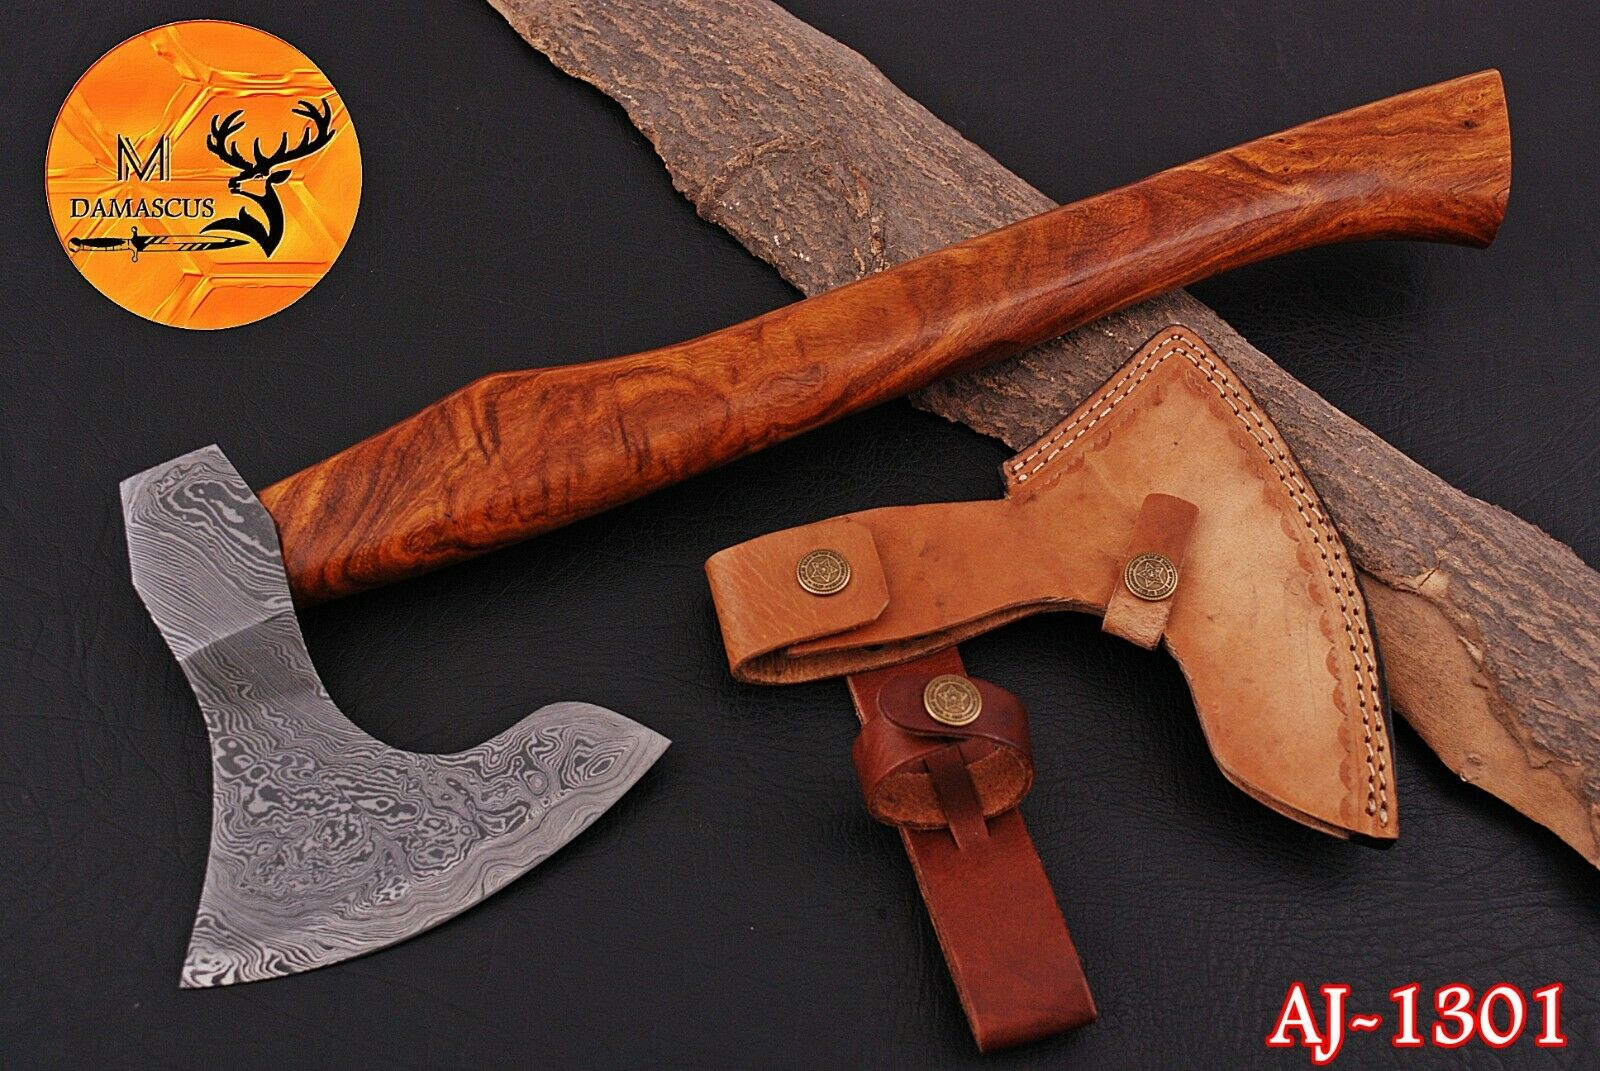 Hand Forged Damascus Steel Axe With Rose Wood Handle - Aj 1301